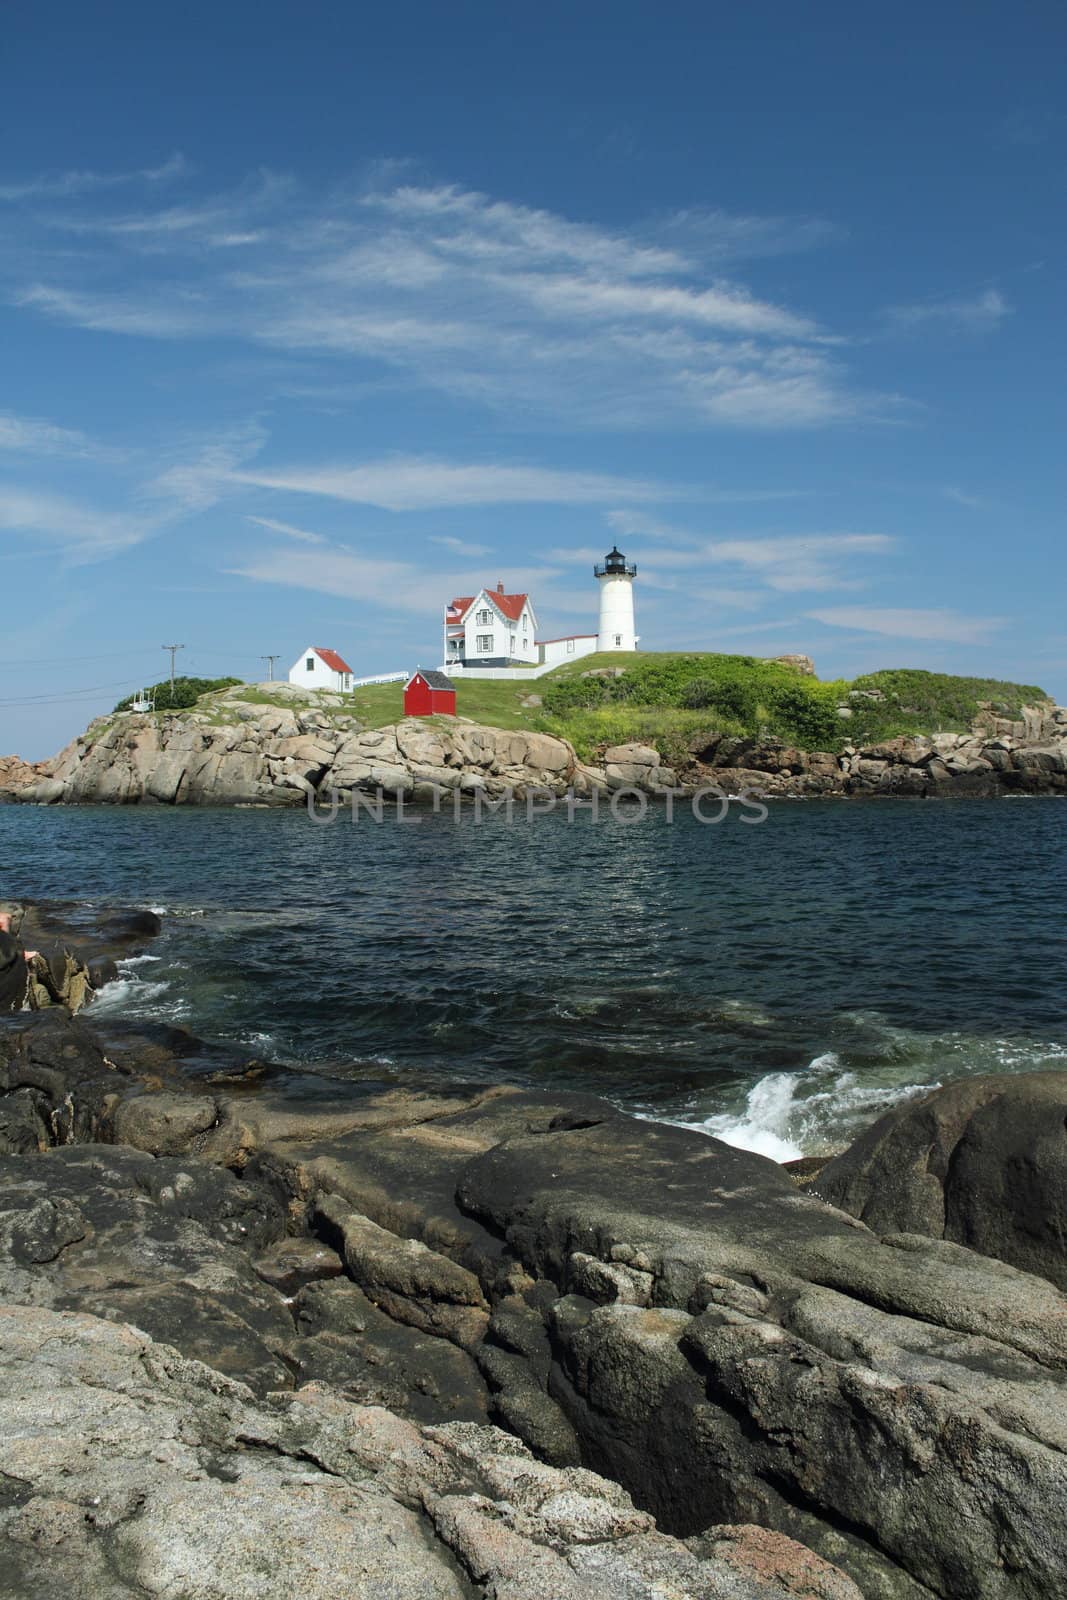 The Cape Neddick Nubble light house from a distance.